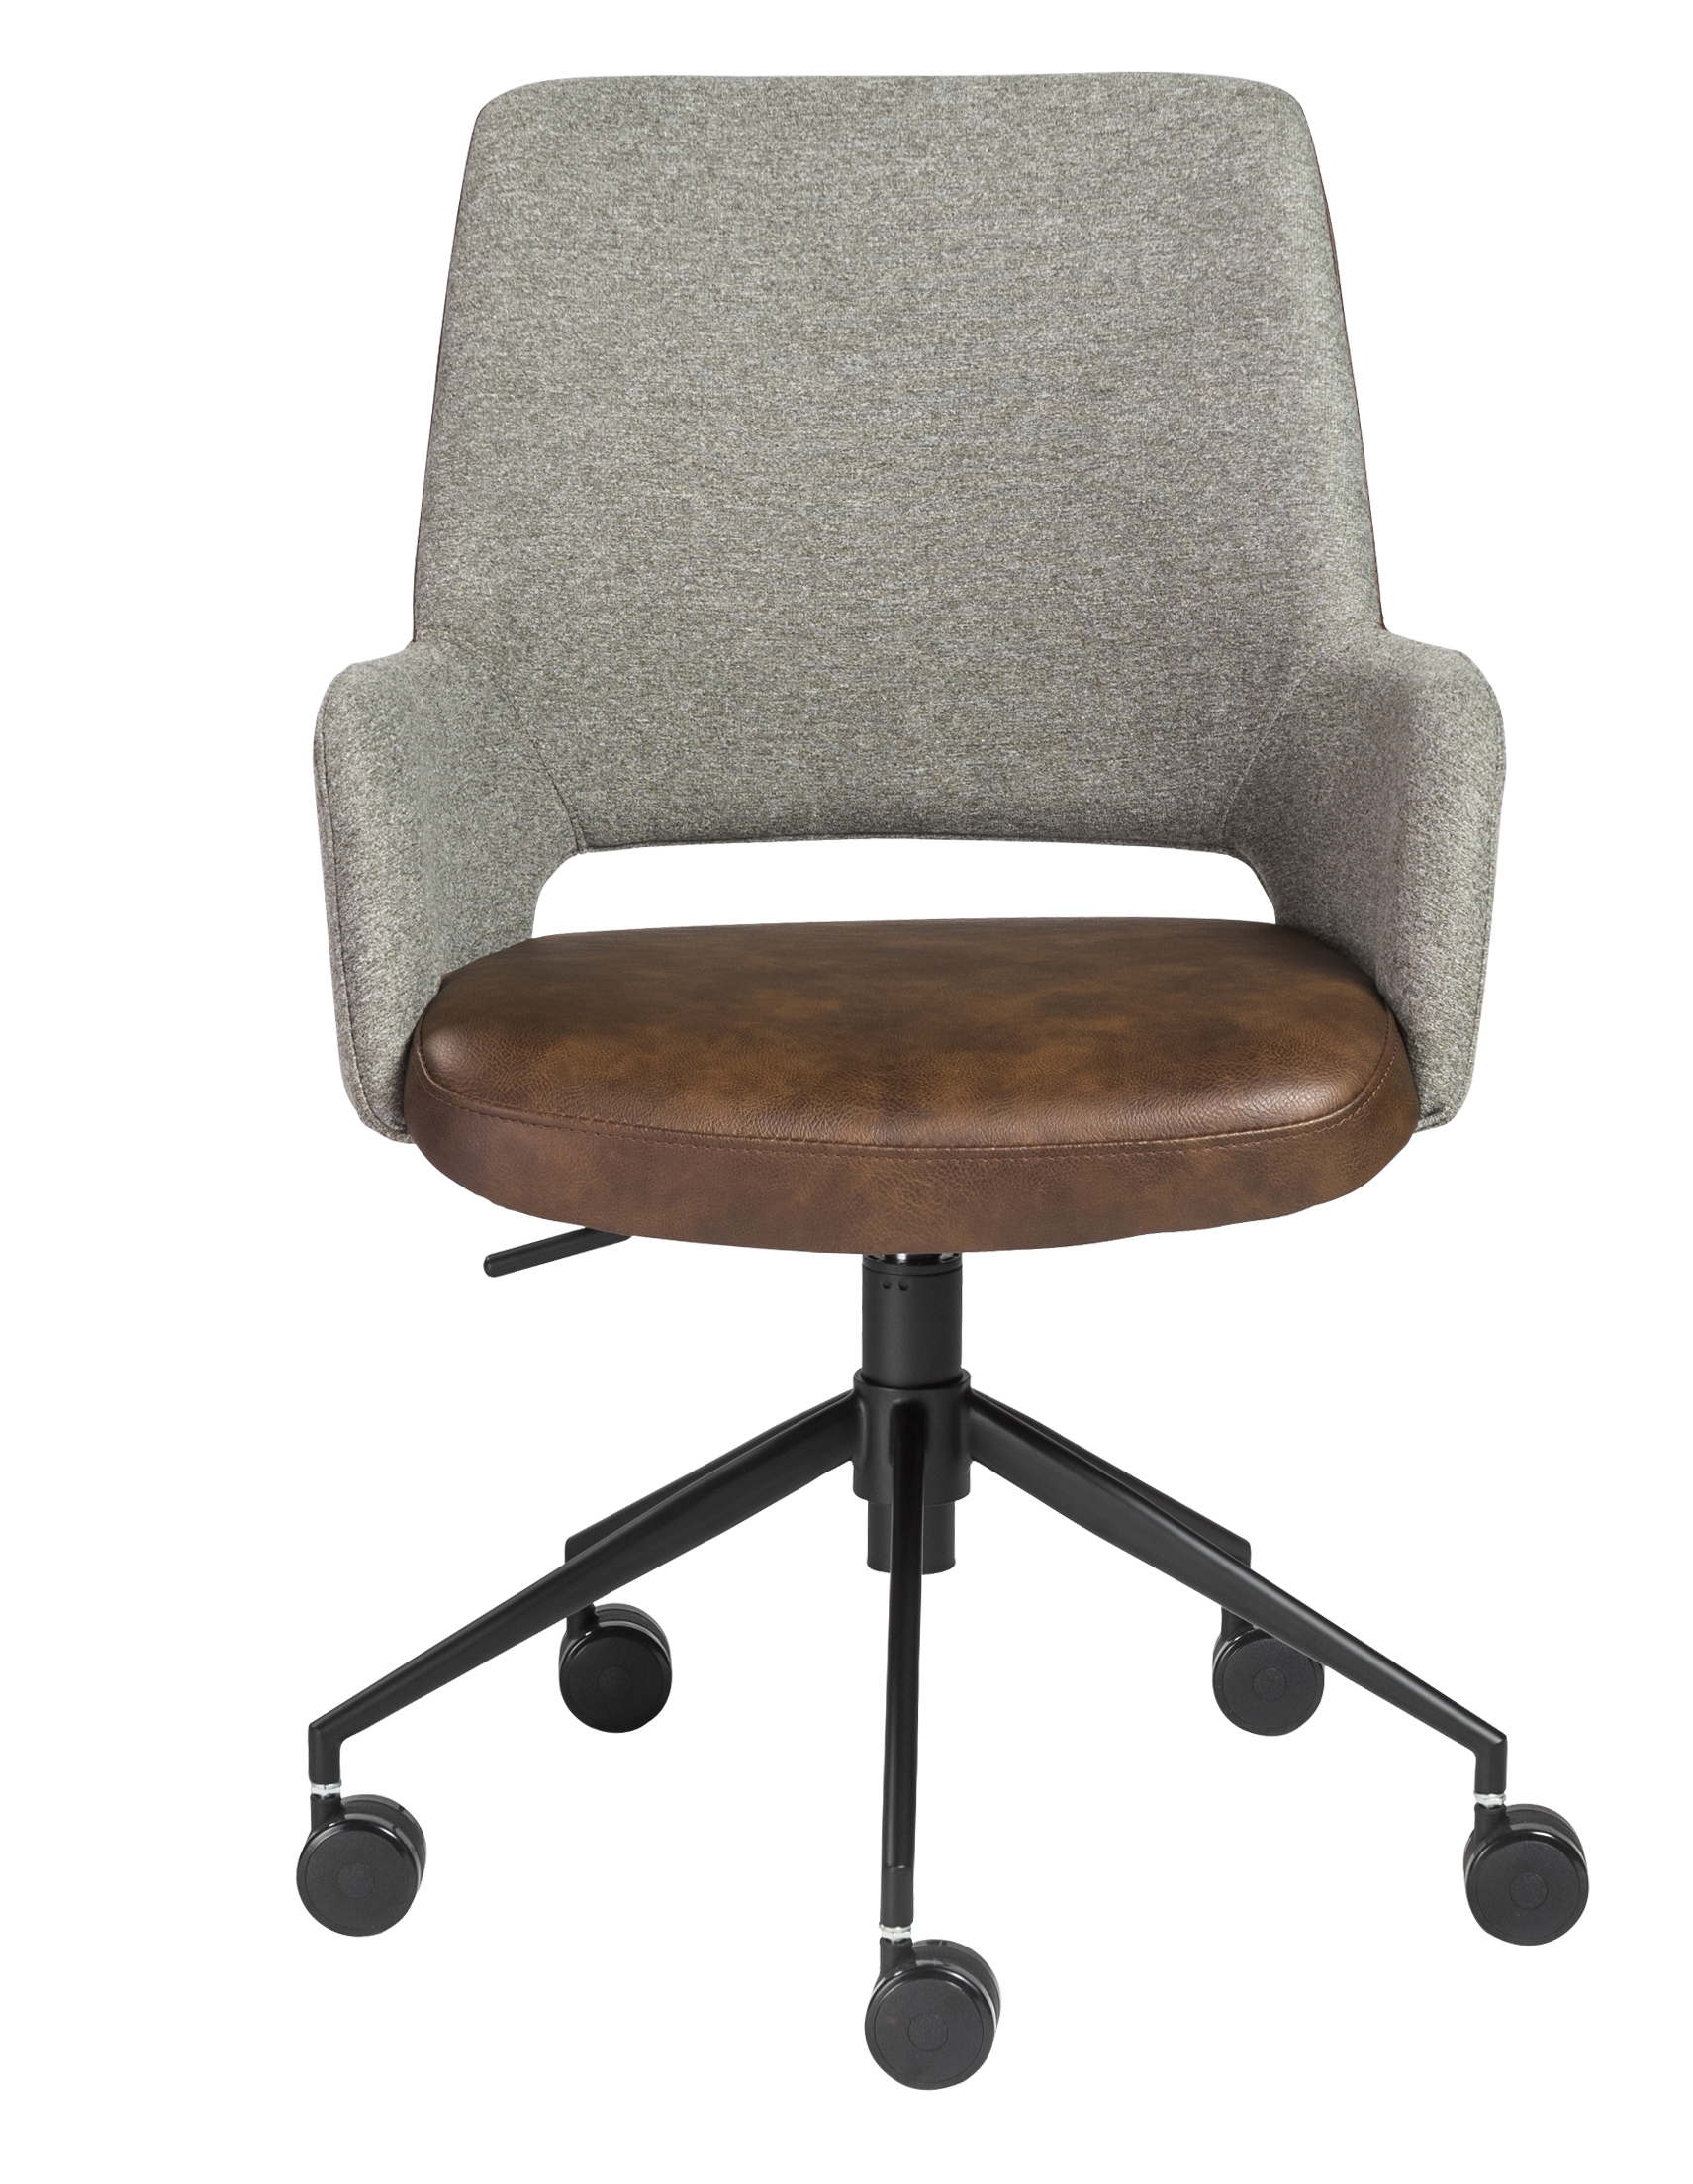 Randy Office Chair, Gray and Brown - Image 0